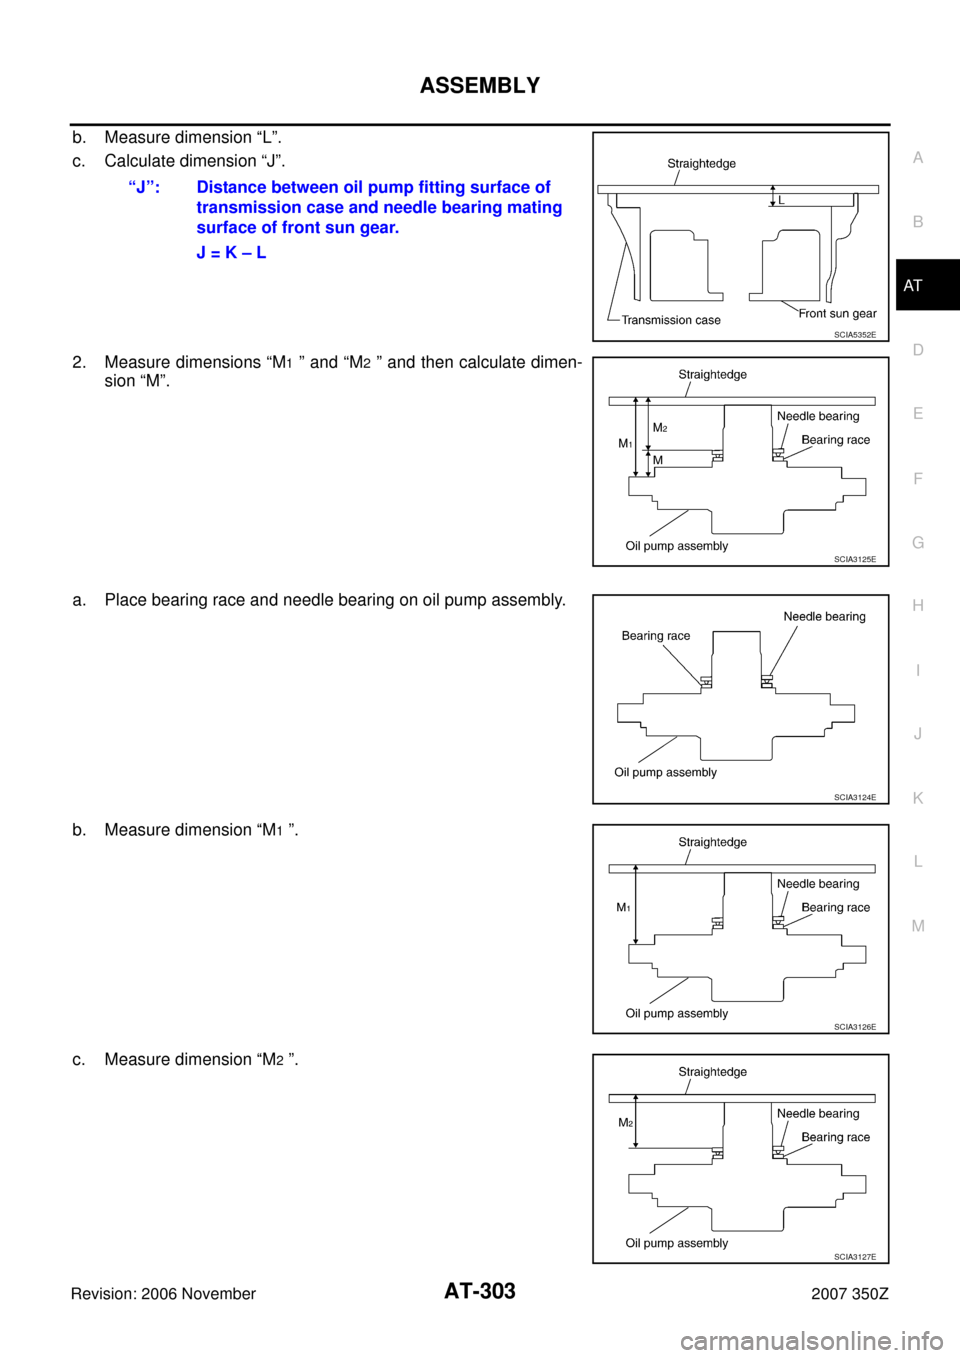 NISSAN 350Z 2007 Z33 Automatic Transmission Owners Guide ASSEMBLY
AT-303
D
E
F
G
H
I
J
K
L
MA
B
AT
Revision: 2006 November2007 350Z
b. Measure dimension “L”.
c. Calculate dimension “J”.
2. Measure dimensions “M
1 ” and “M2 ” and then calcula